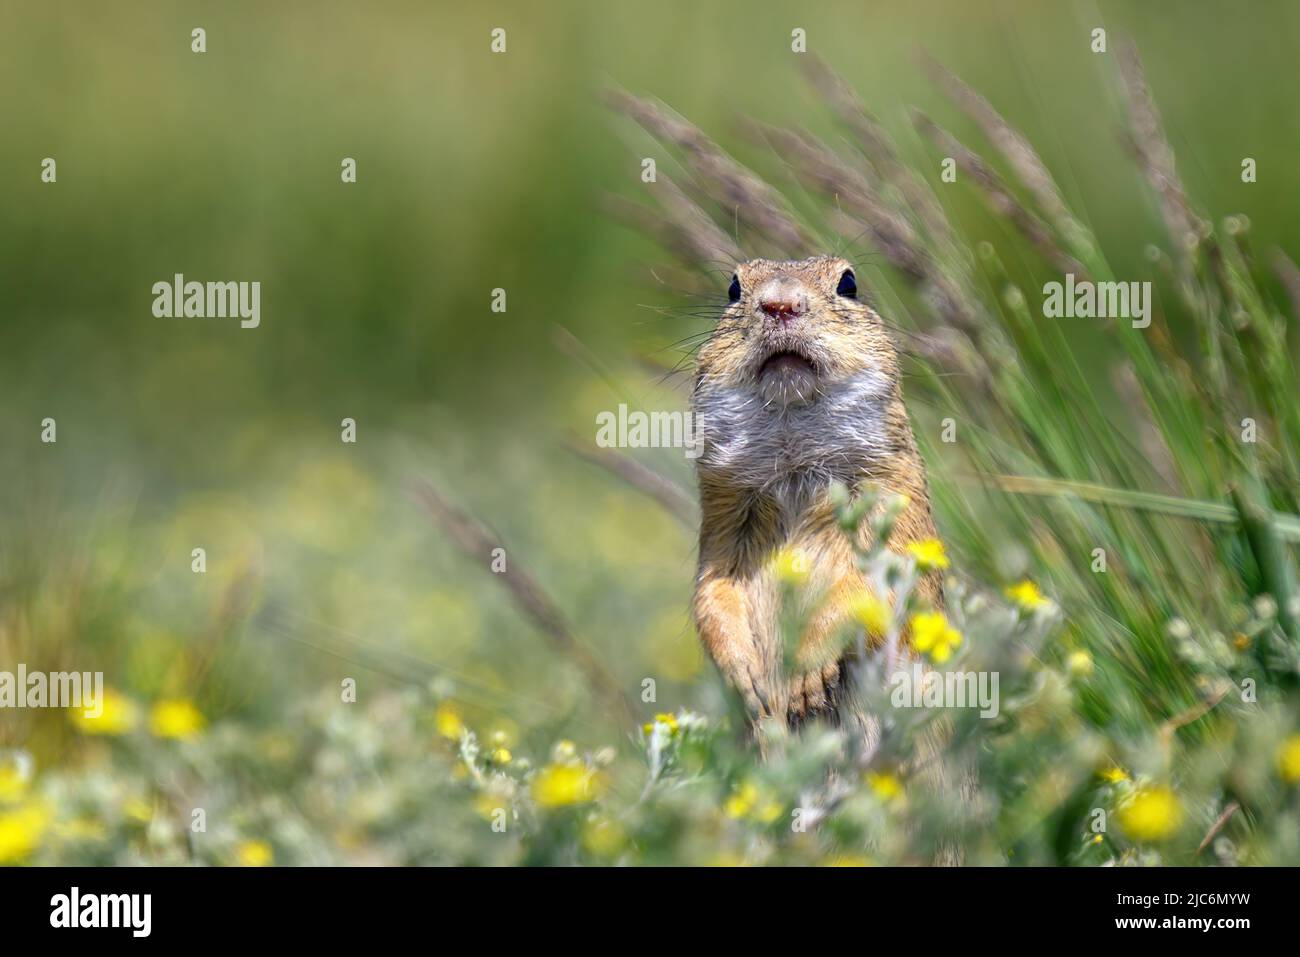 The ground squirrel runs across the plain in search of food. Stock Photo